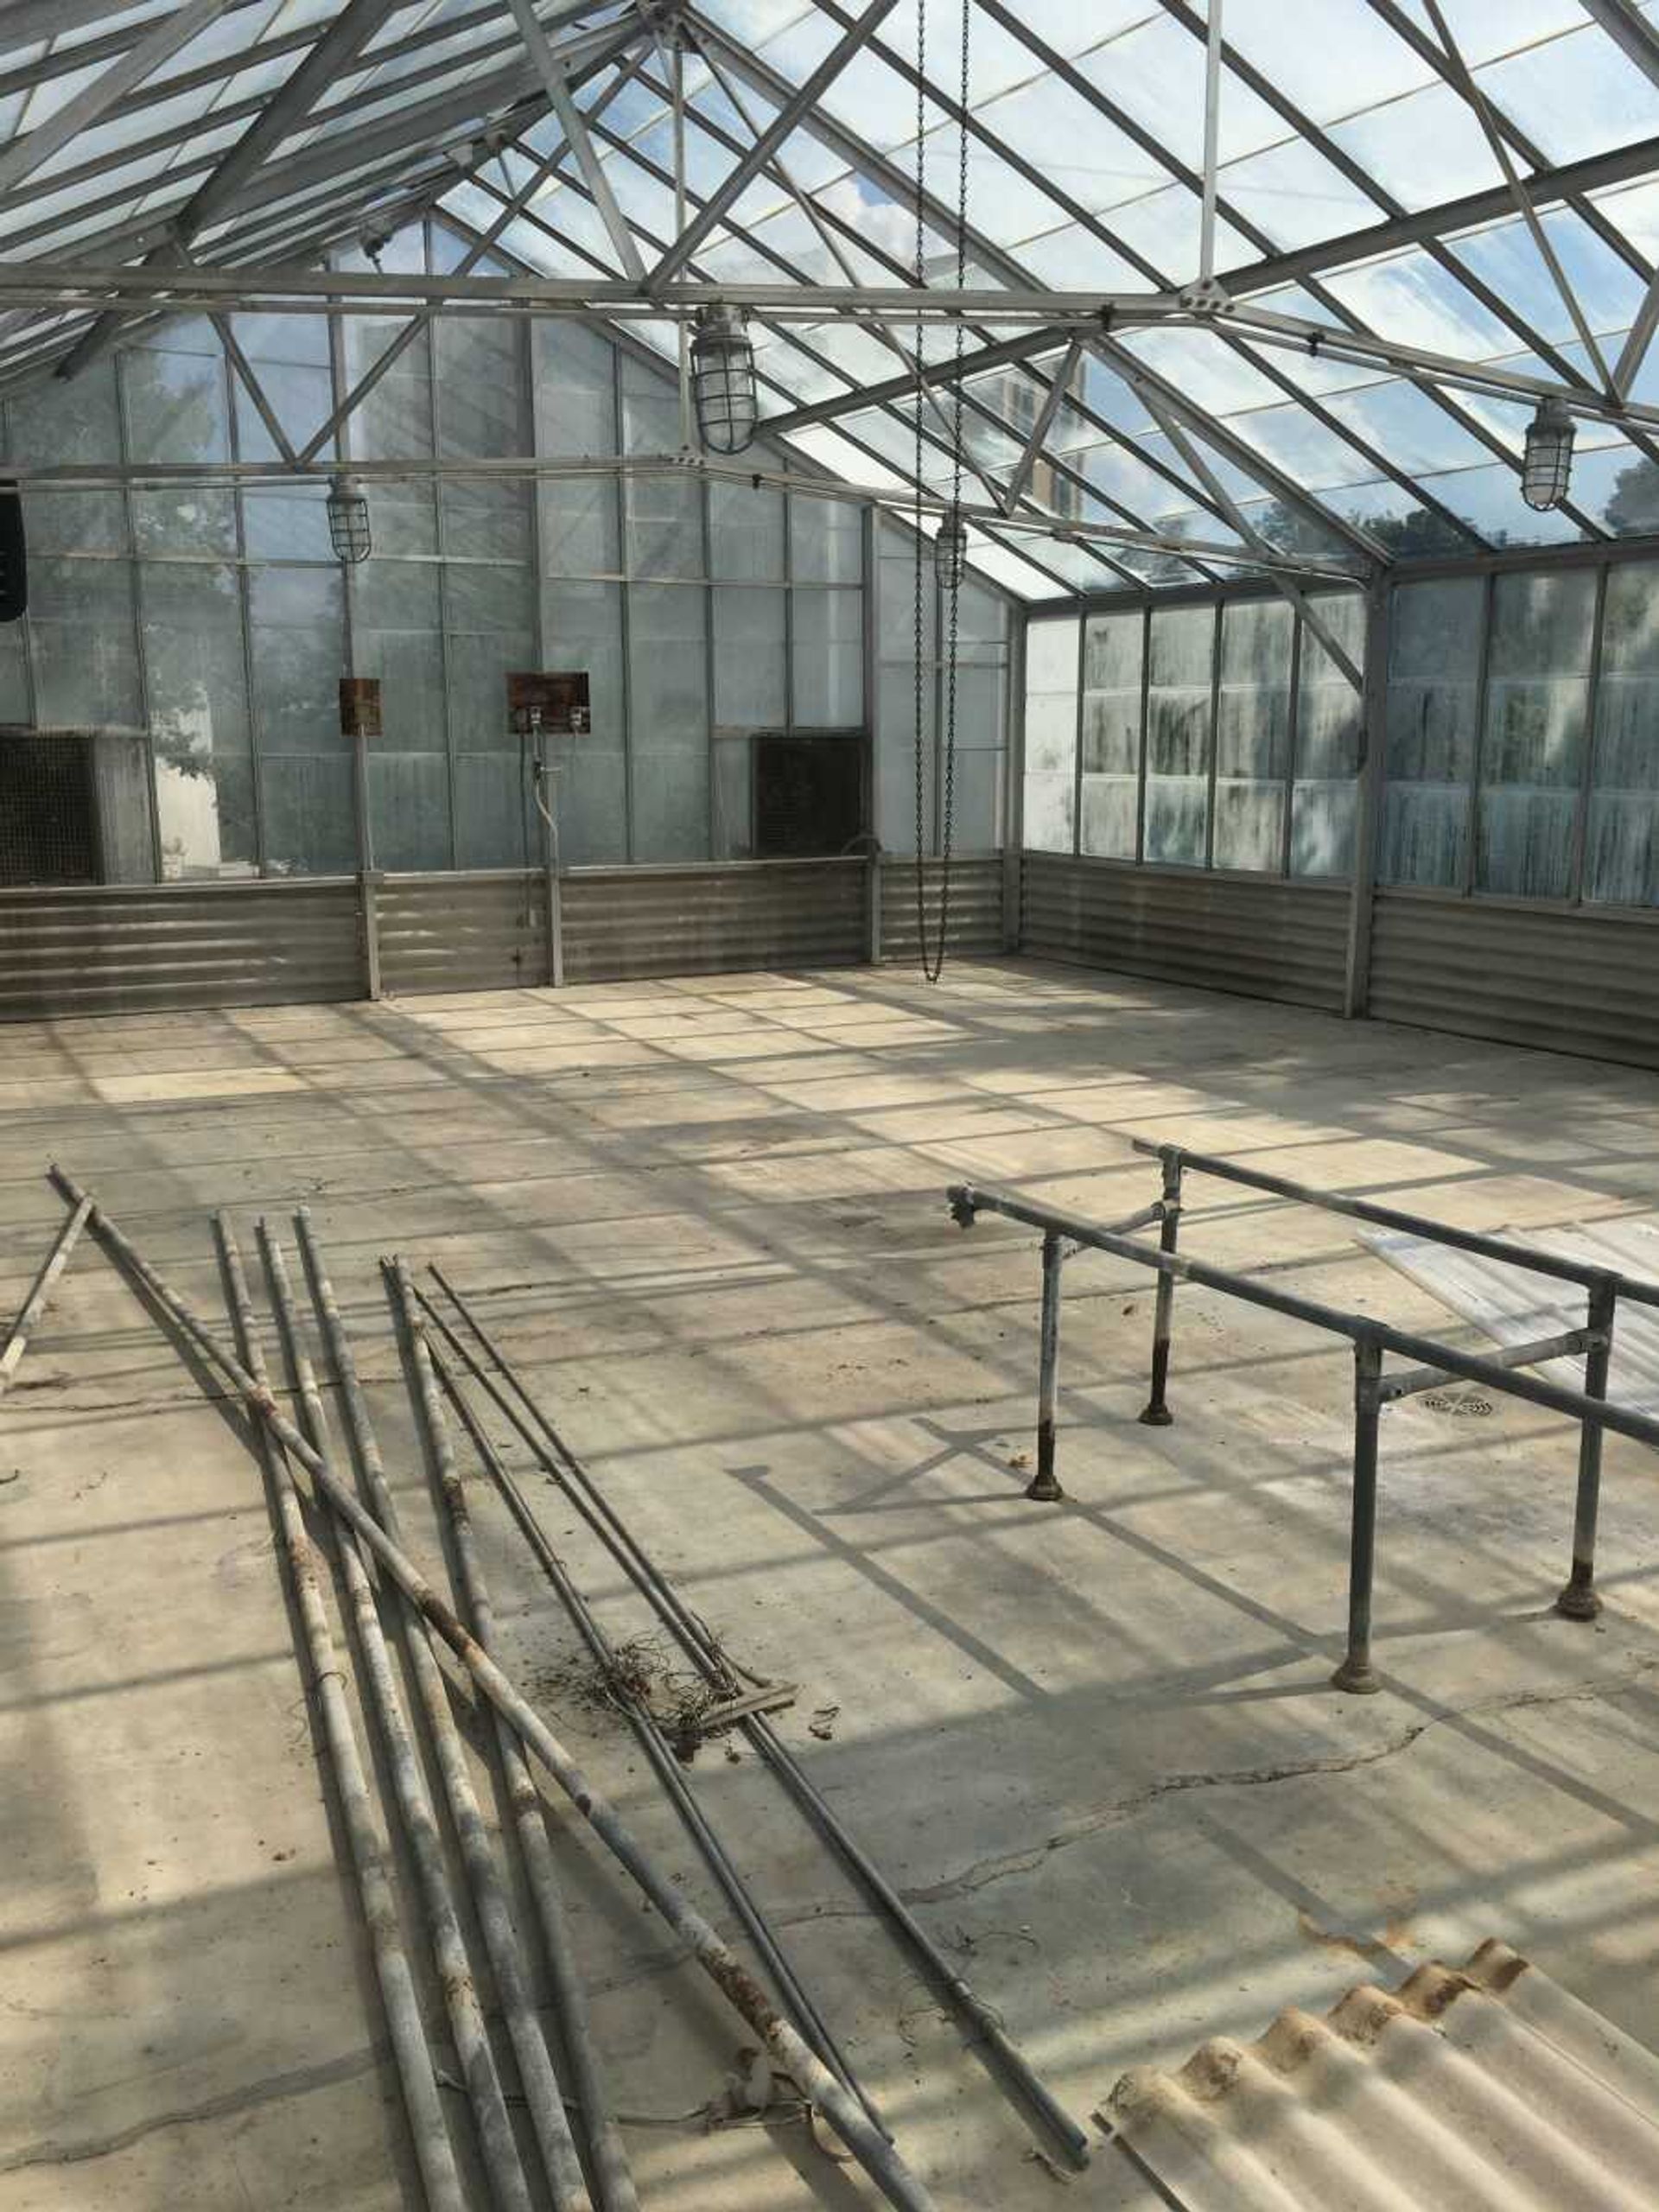 The back greenhouse, which is designed for student and faculty research projects, got a major cleanout in which Facilities Management took out the old, nonfunctional equipment. 